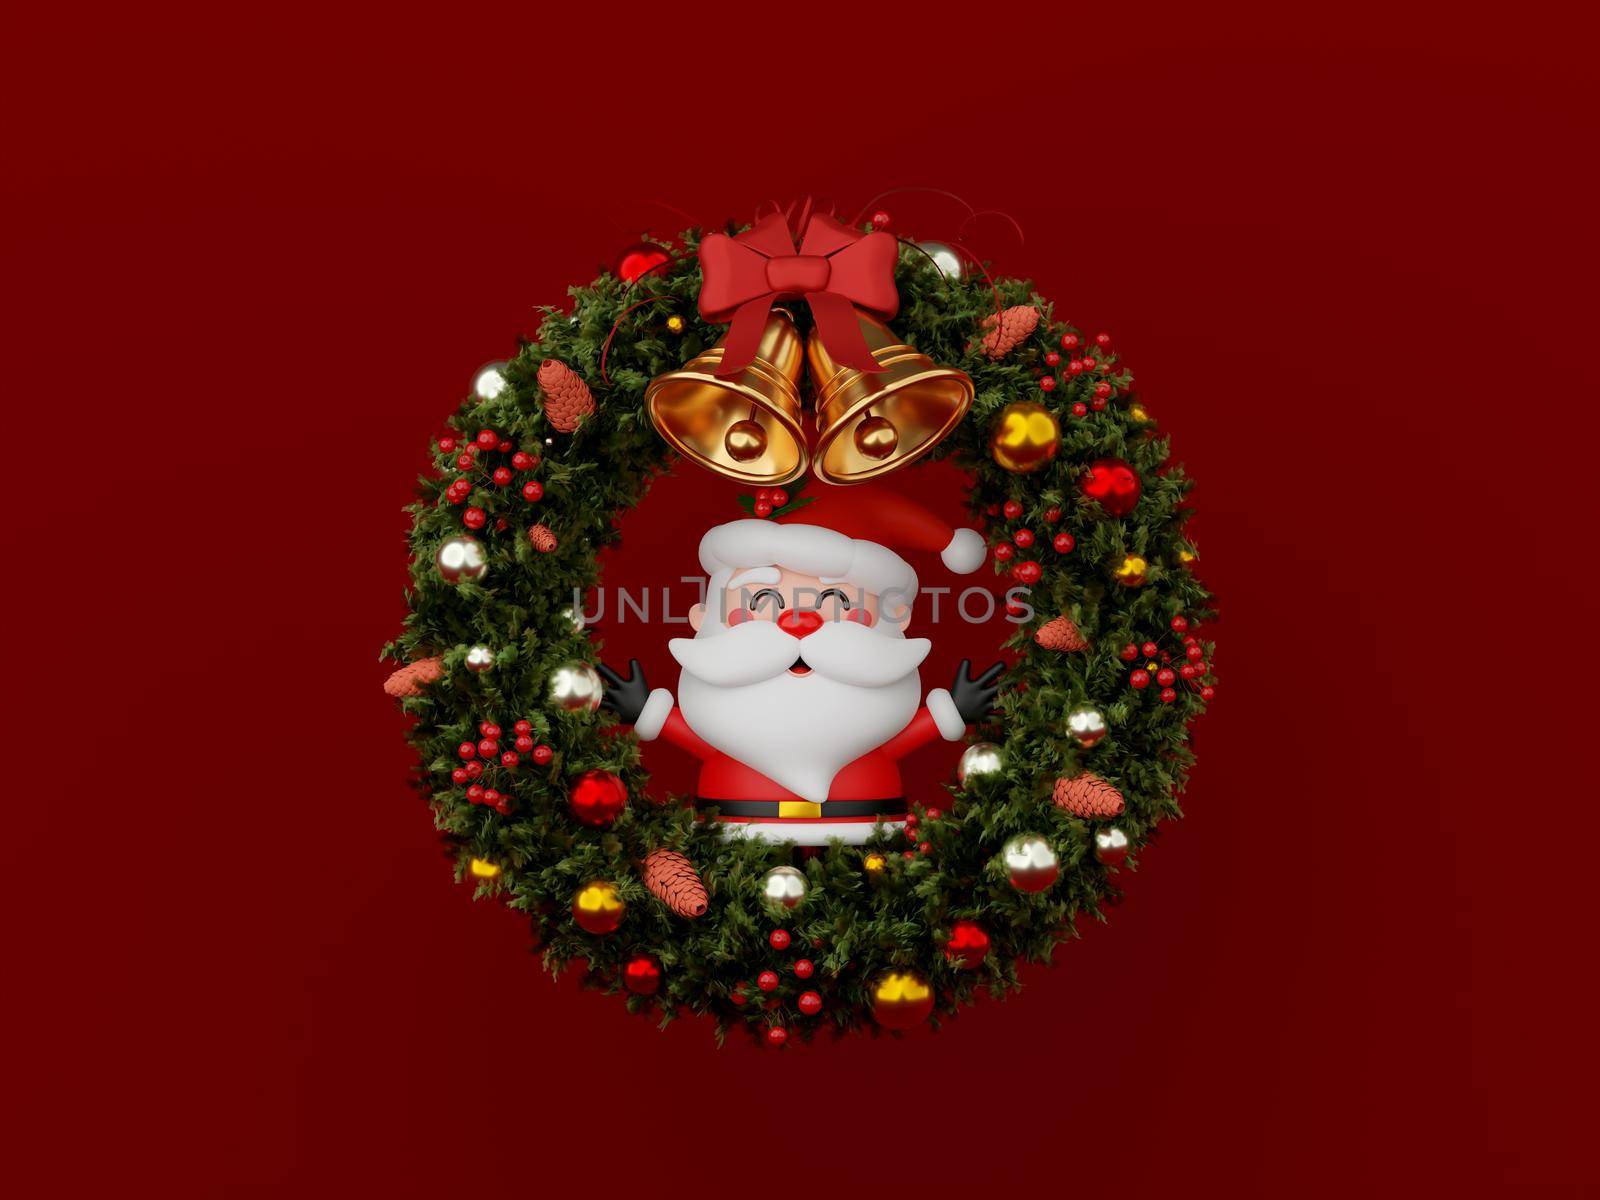 Christmas banner of Santa Claus with Christmas wreath on red background, 3d illustration by nutzchotwarut